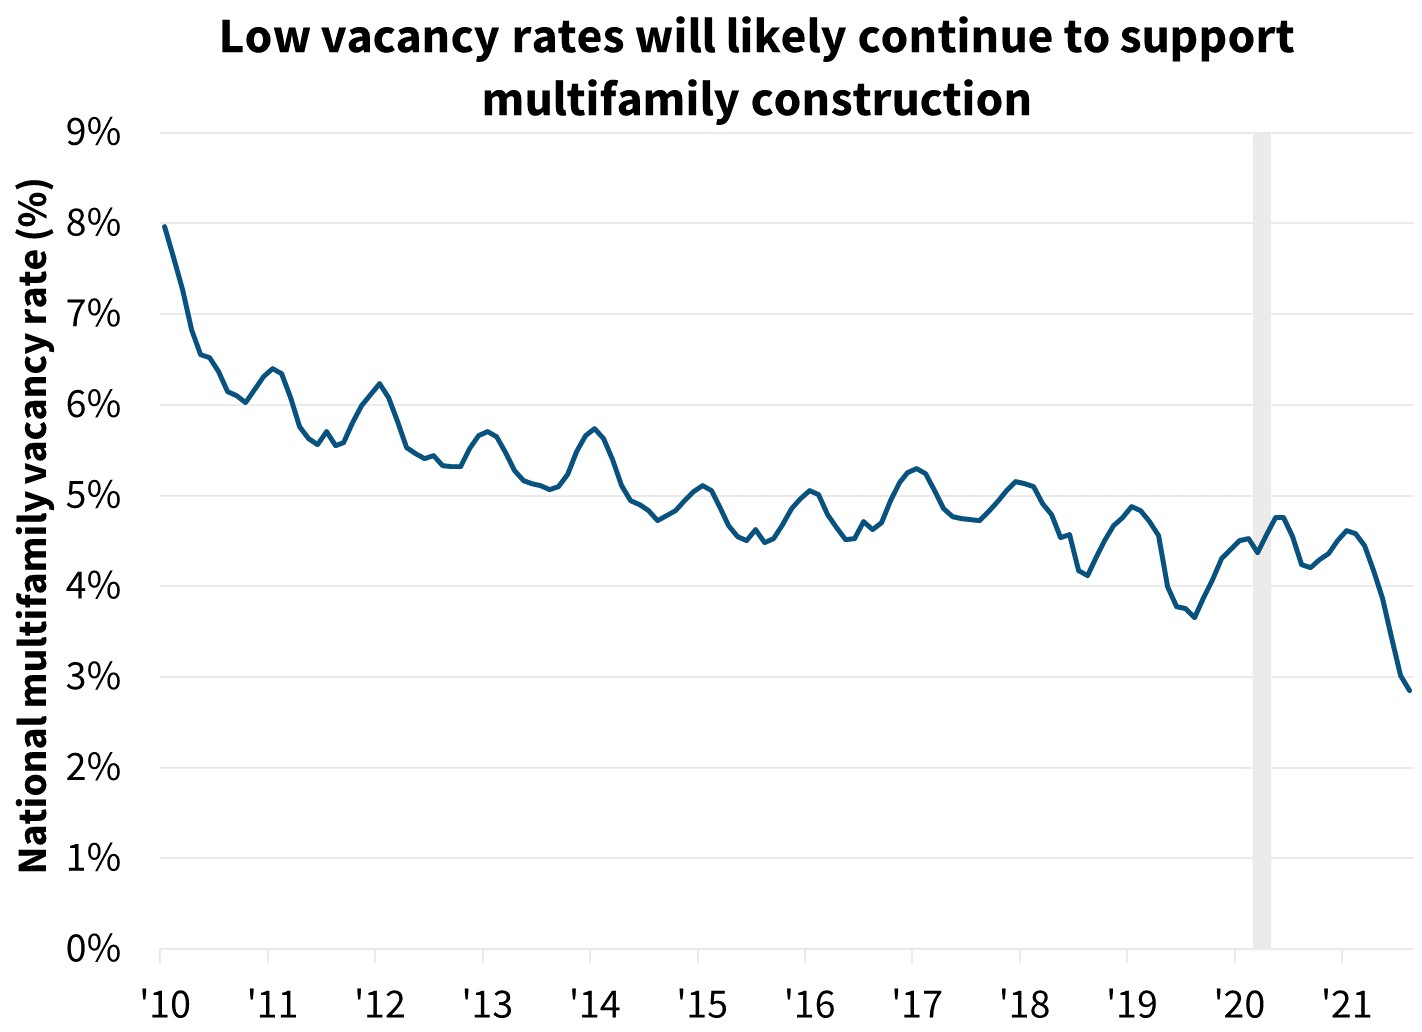  Low vacancy rates will likely continue to support multifamily construction 